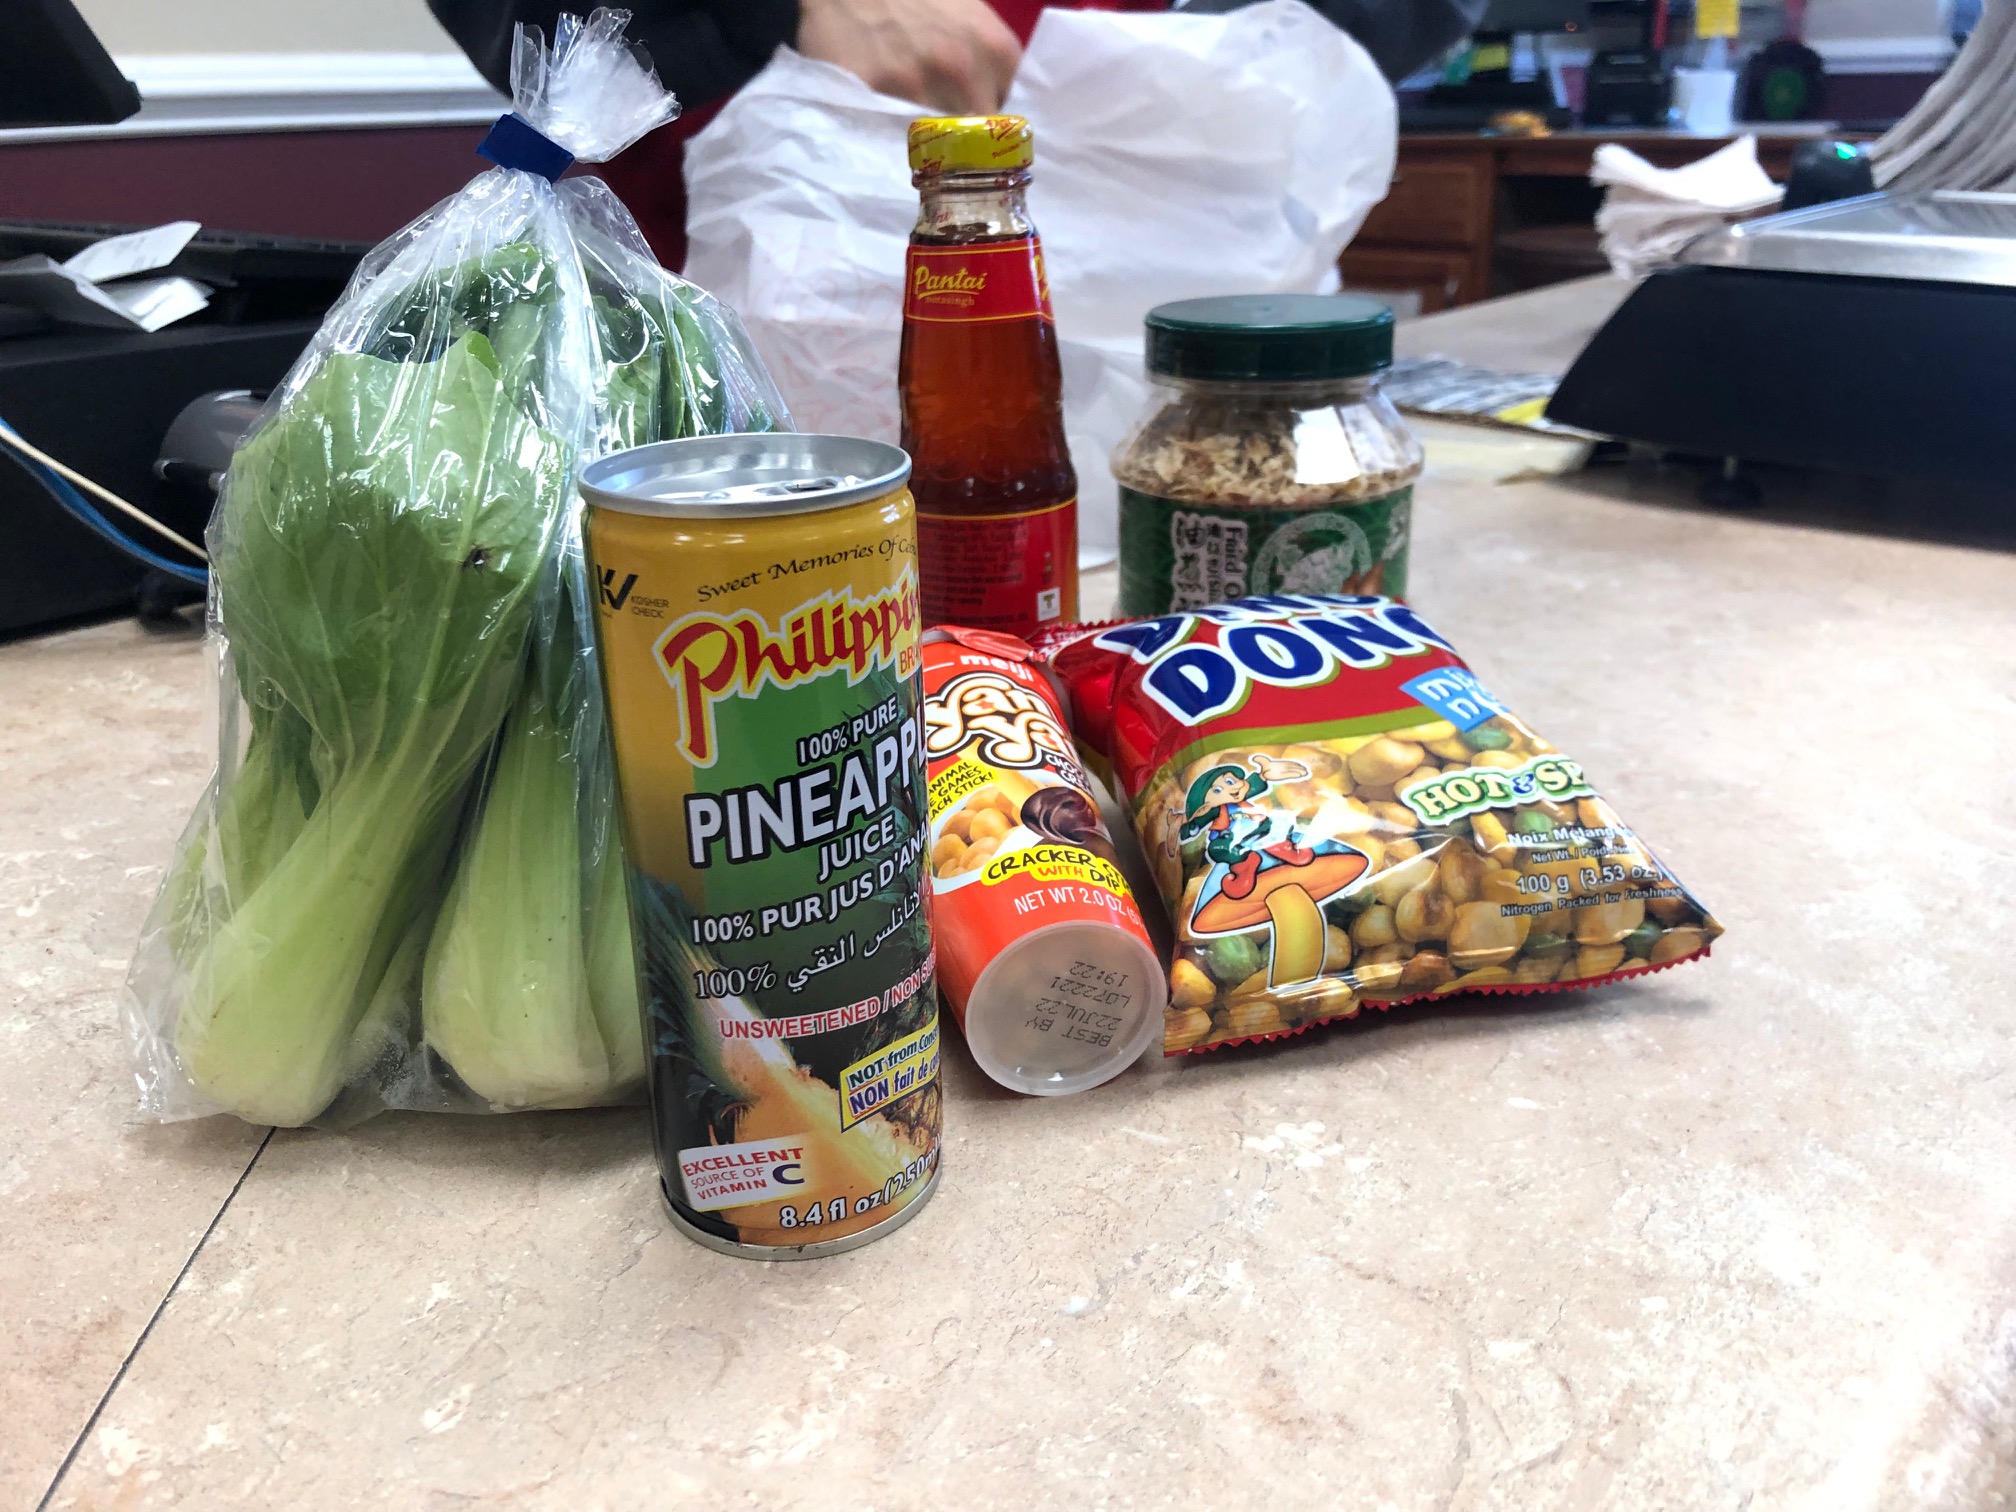 The author's purchase sits at the check out: a plastic bag of Shanghai choy, a can of pineapple juice, a jar of sauce, a cup of chocolate treats, a bag of spicy nuts, and a jar with green lid full of fried onions. Photo by Alyssa Buckley.